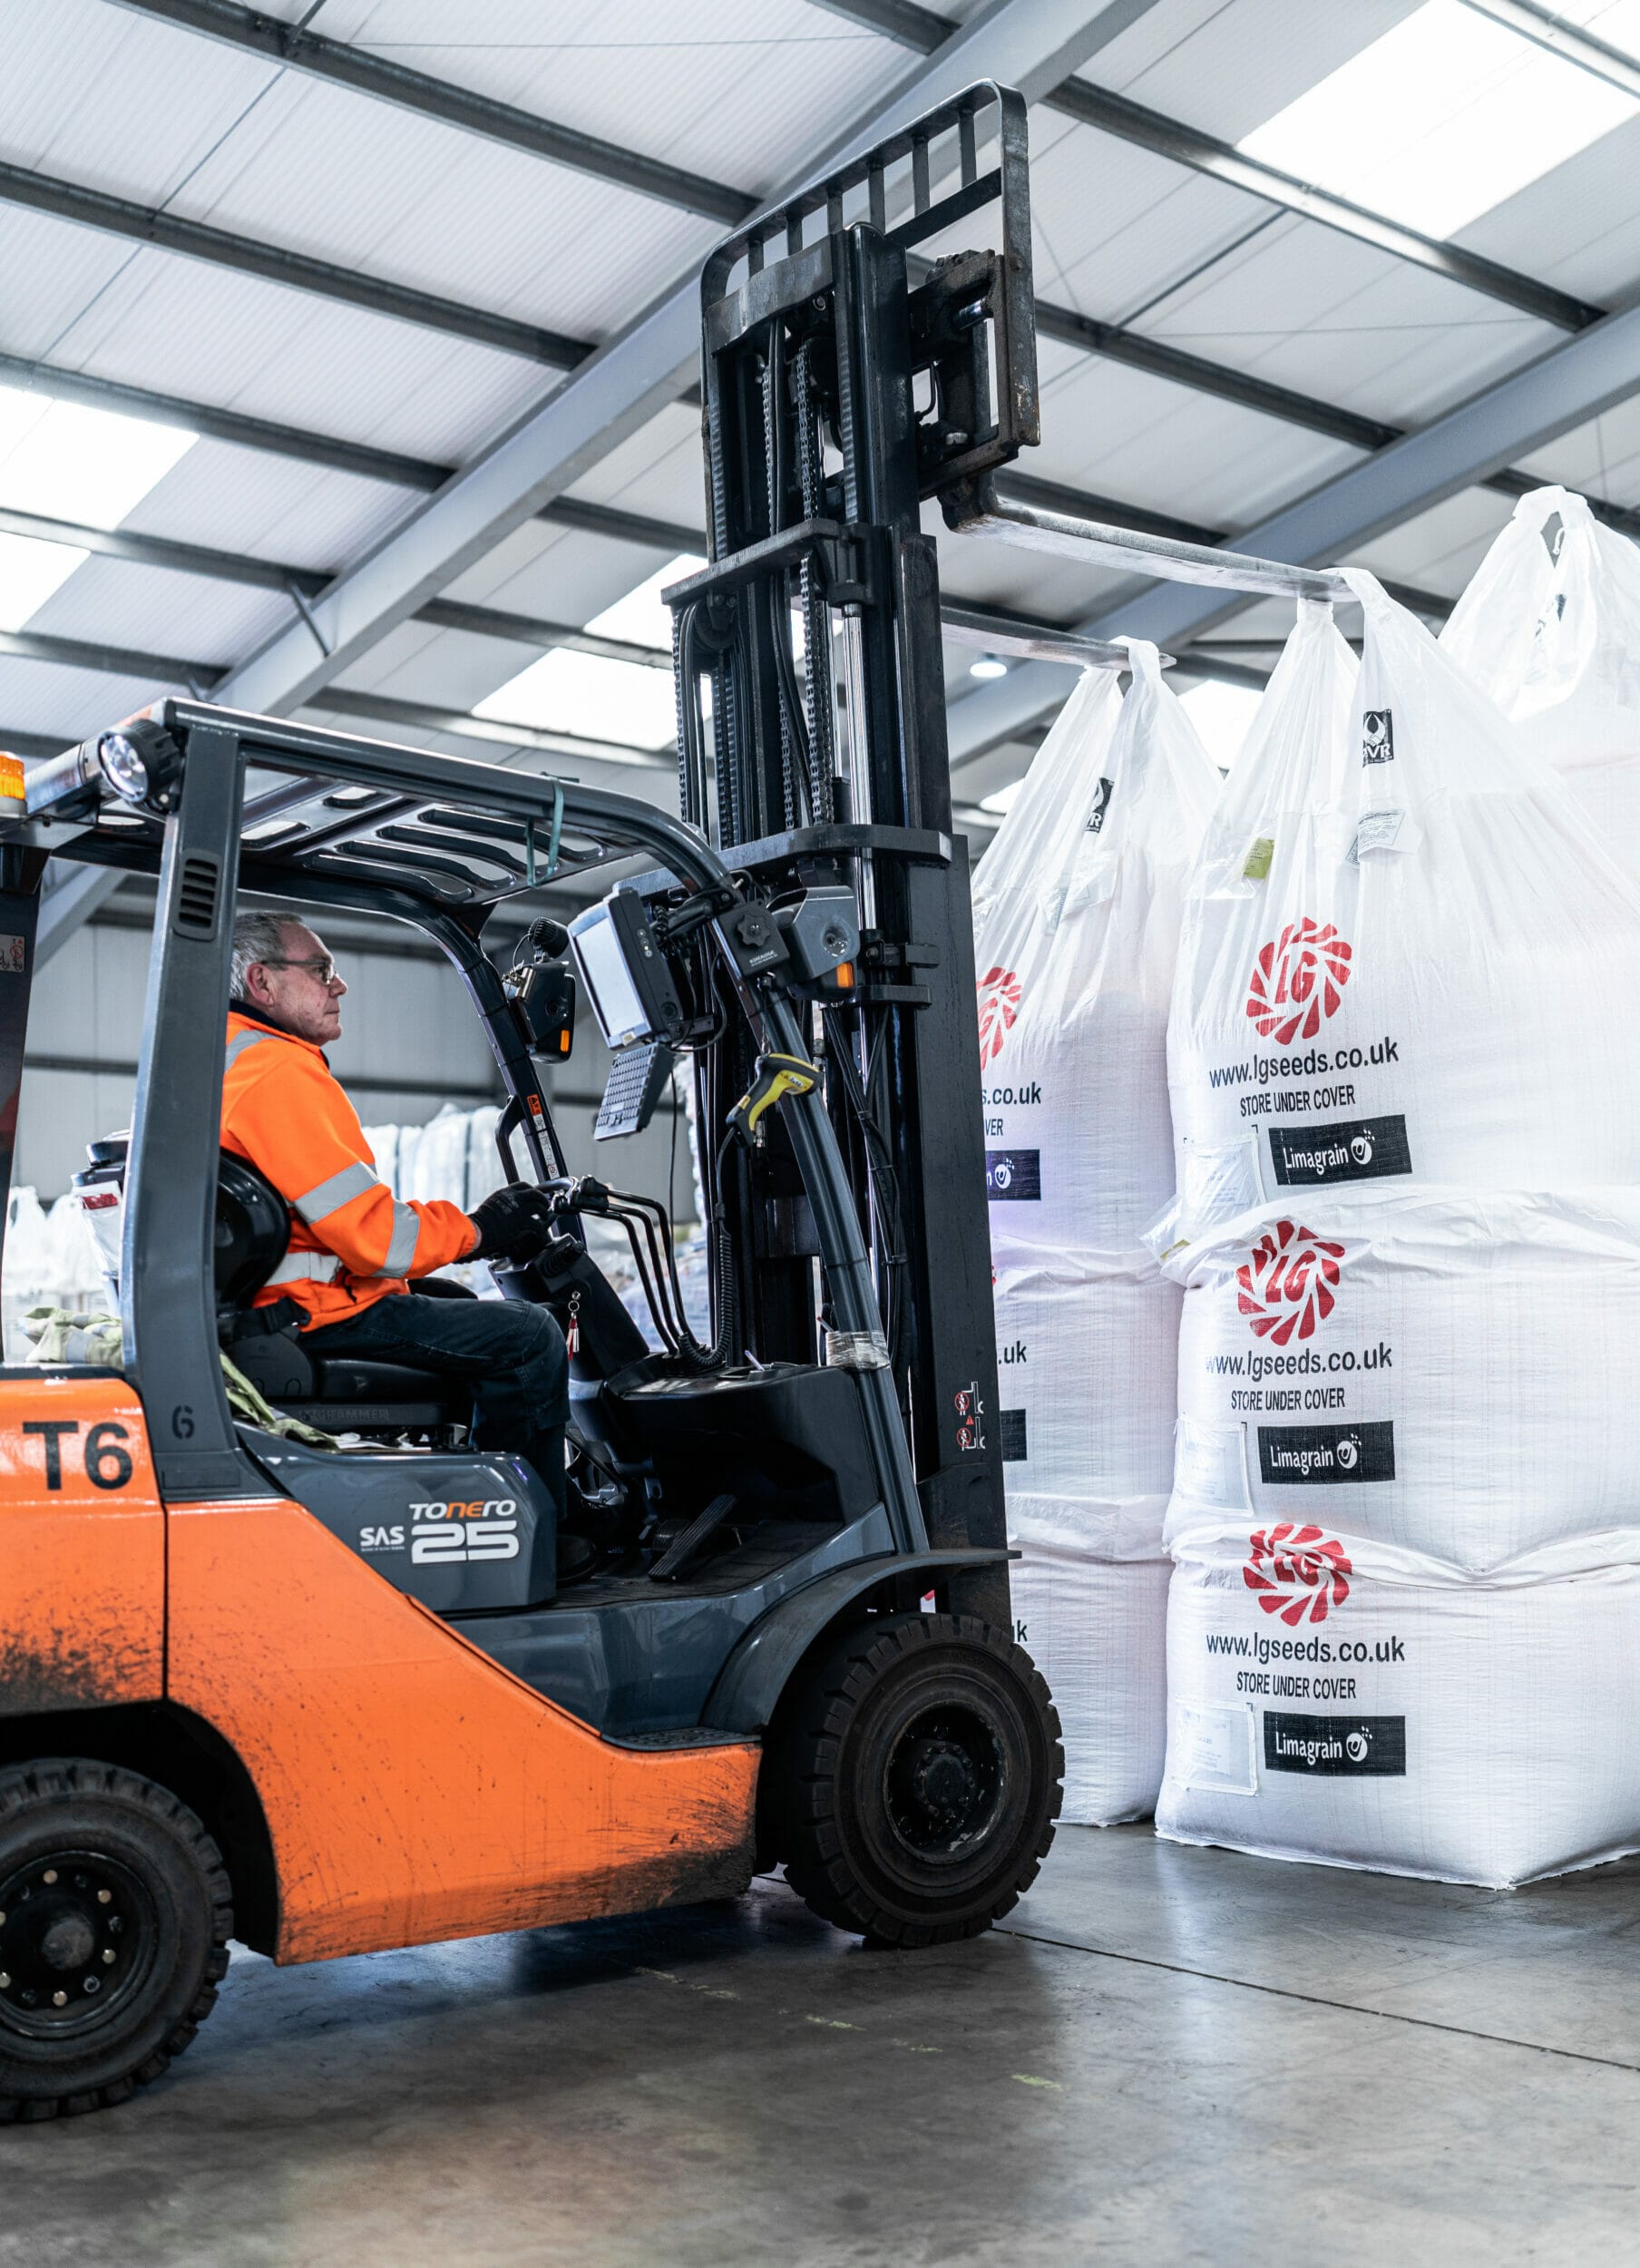 Forklift and LG tonne seed bags